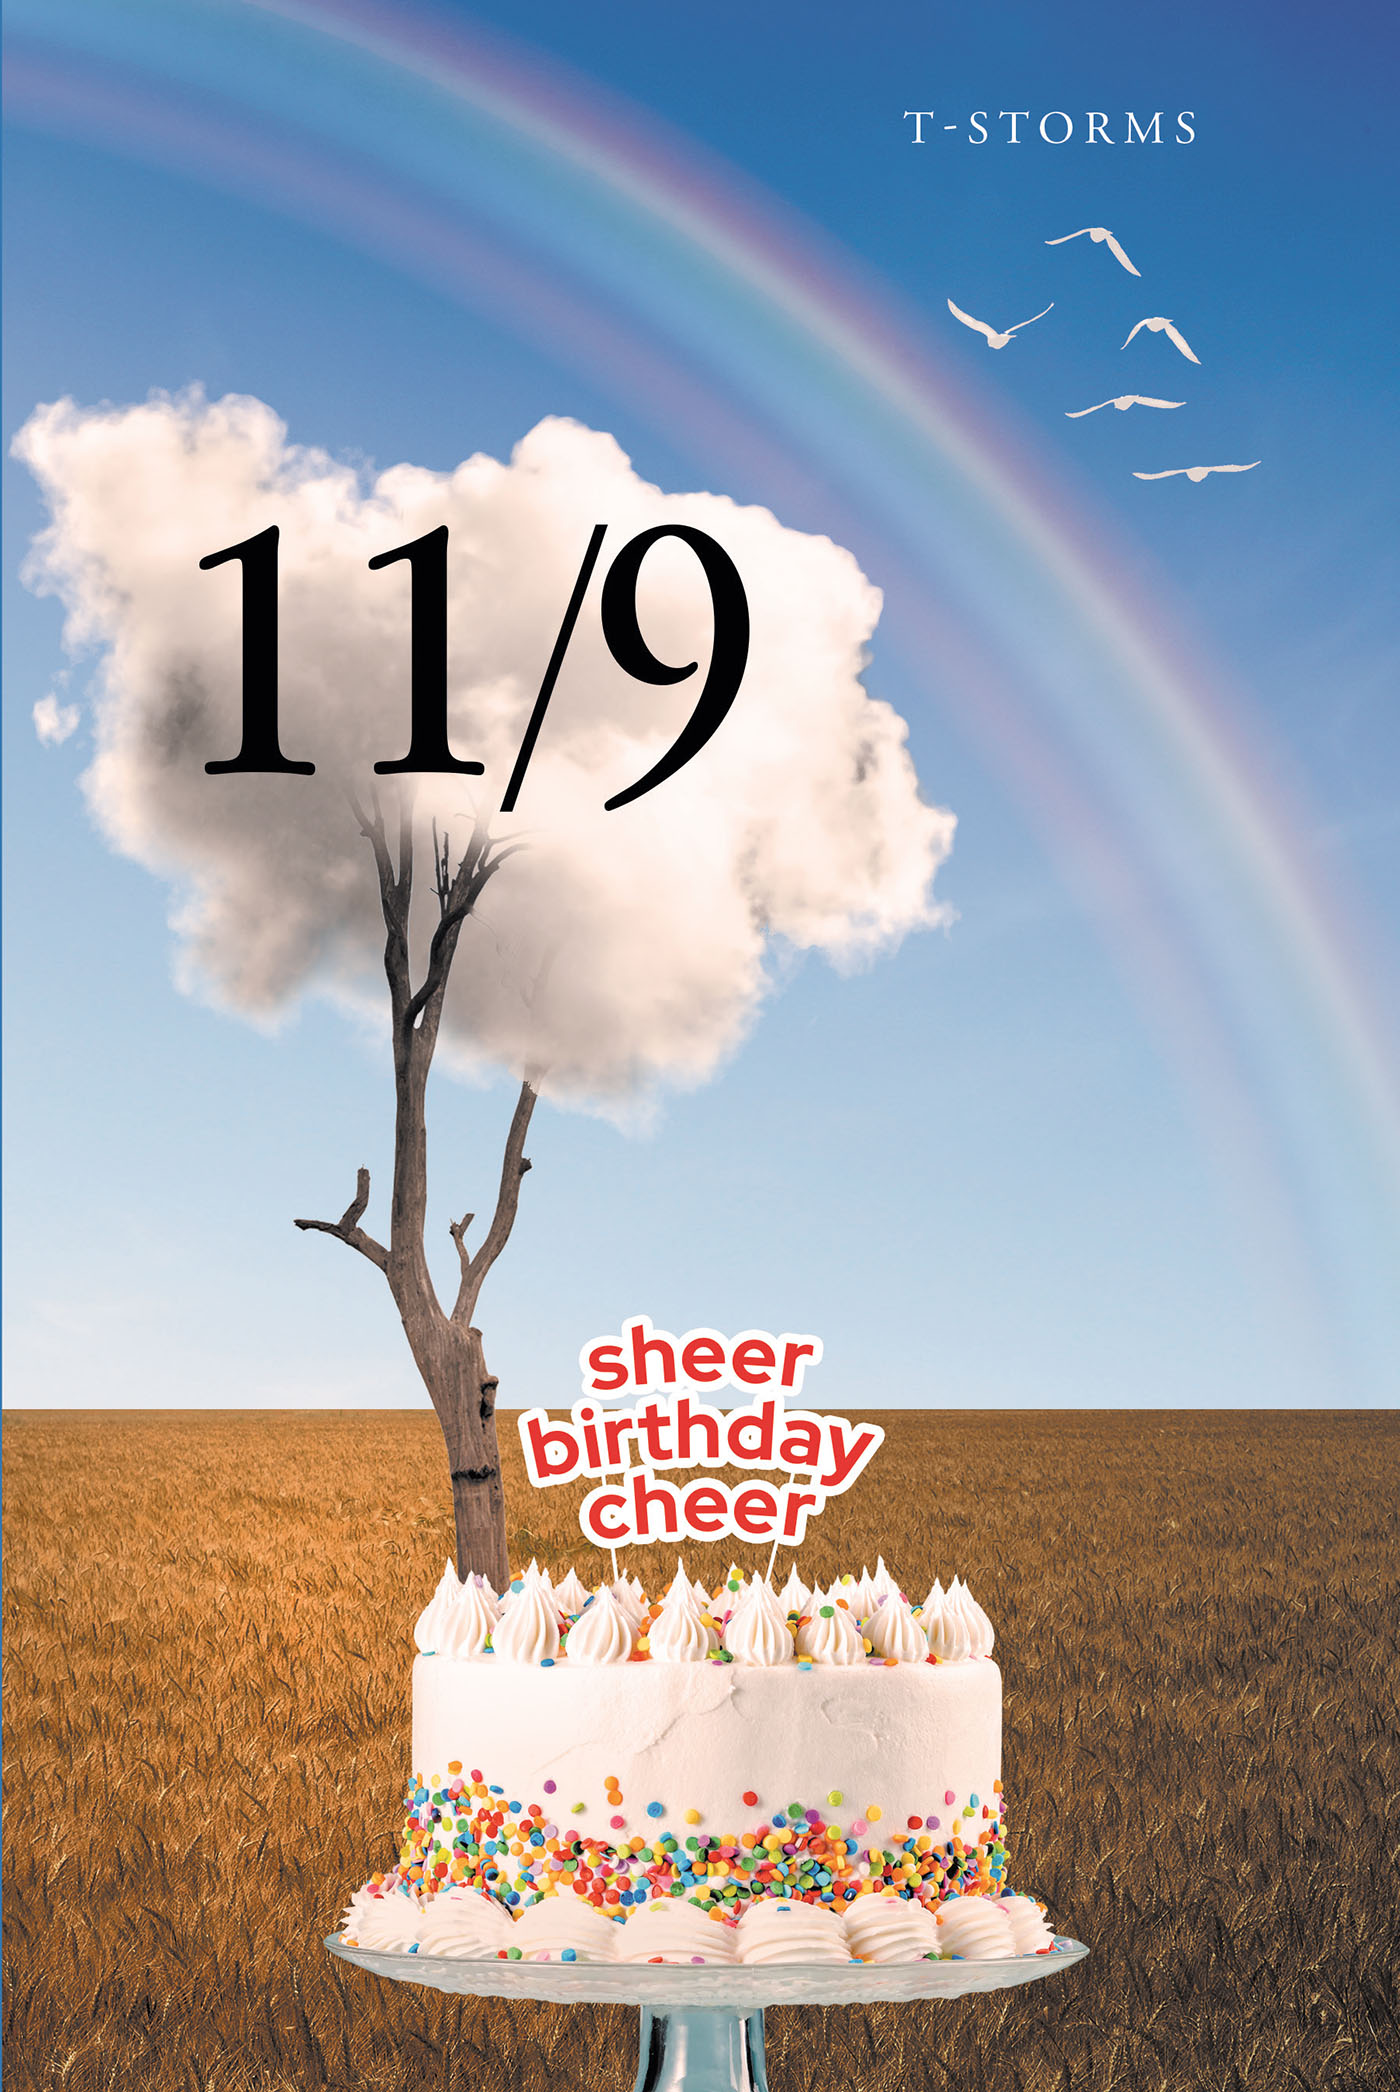 Author T-Storms’s New Book, “11/9: sheer birthday cheer,” is a Thought-Provoking Series of Poems and Ruminations That Reflect the Author’s Views and Experiences in Life